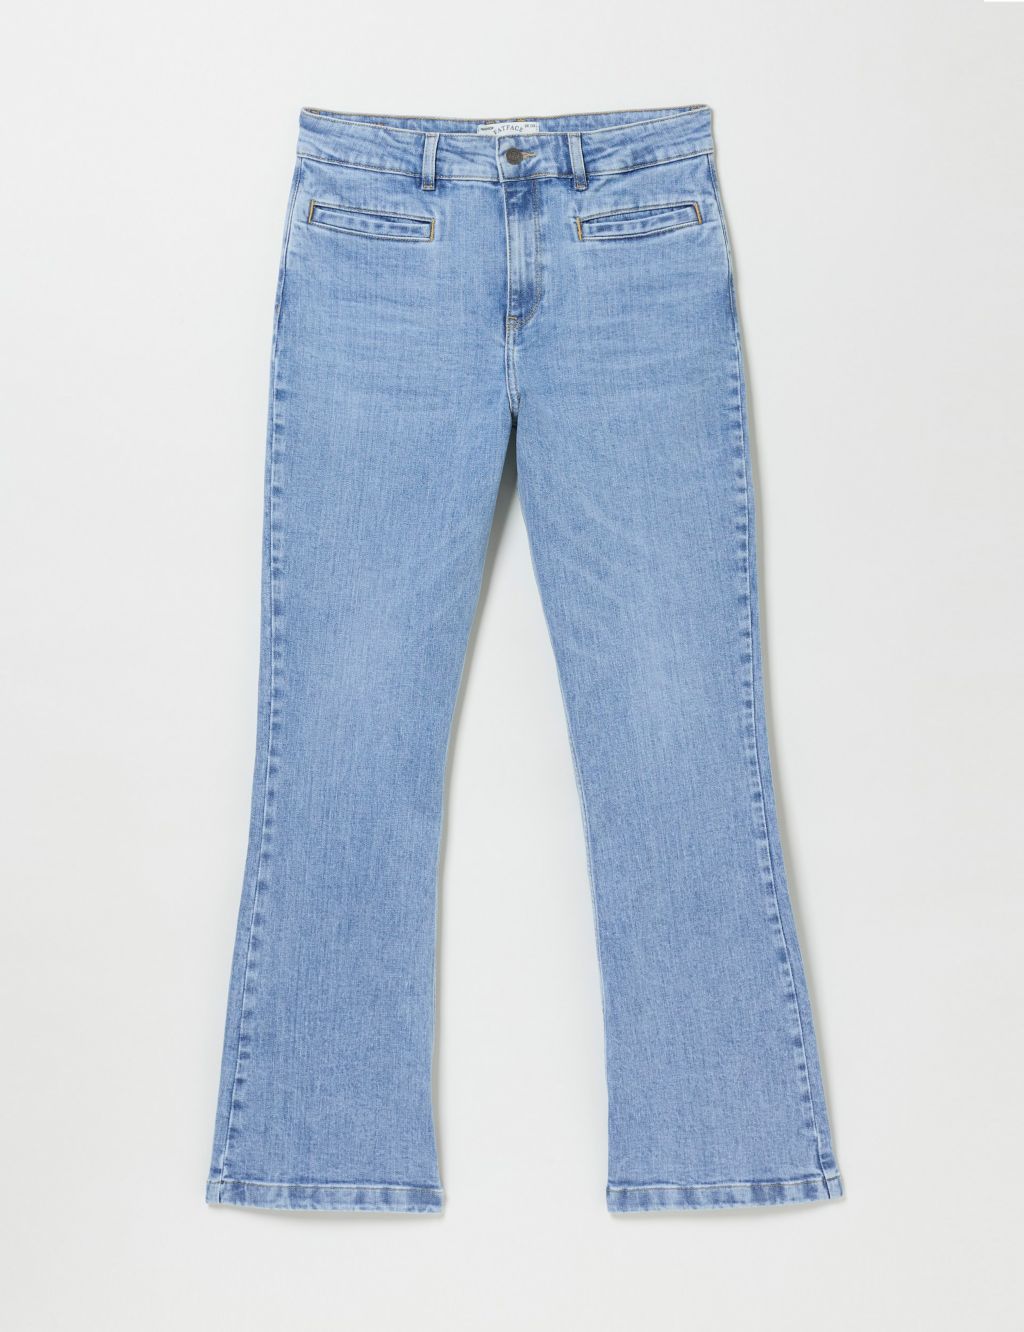 Mid-rise flared jeans - Women